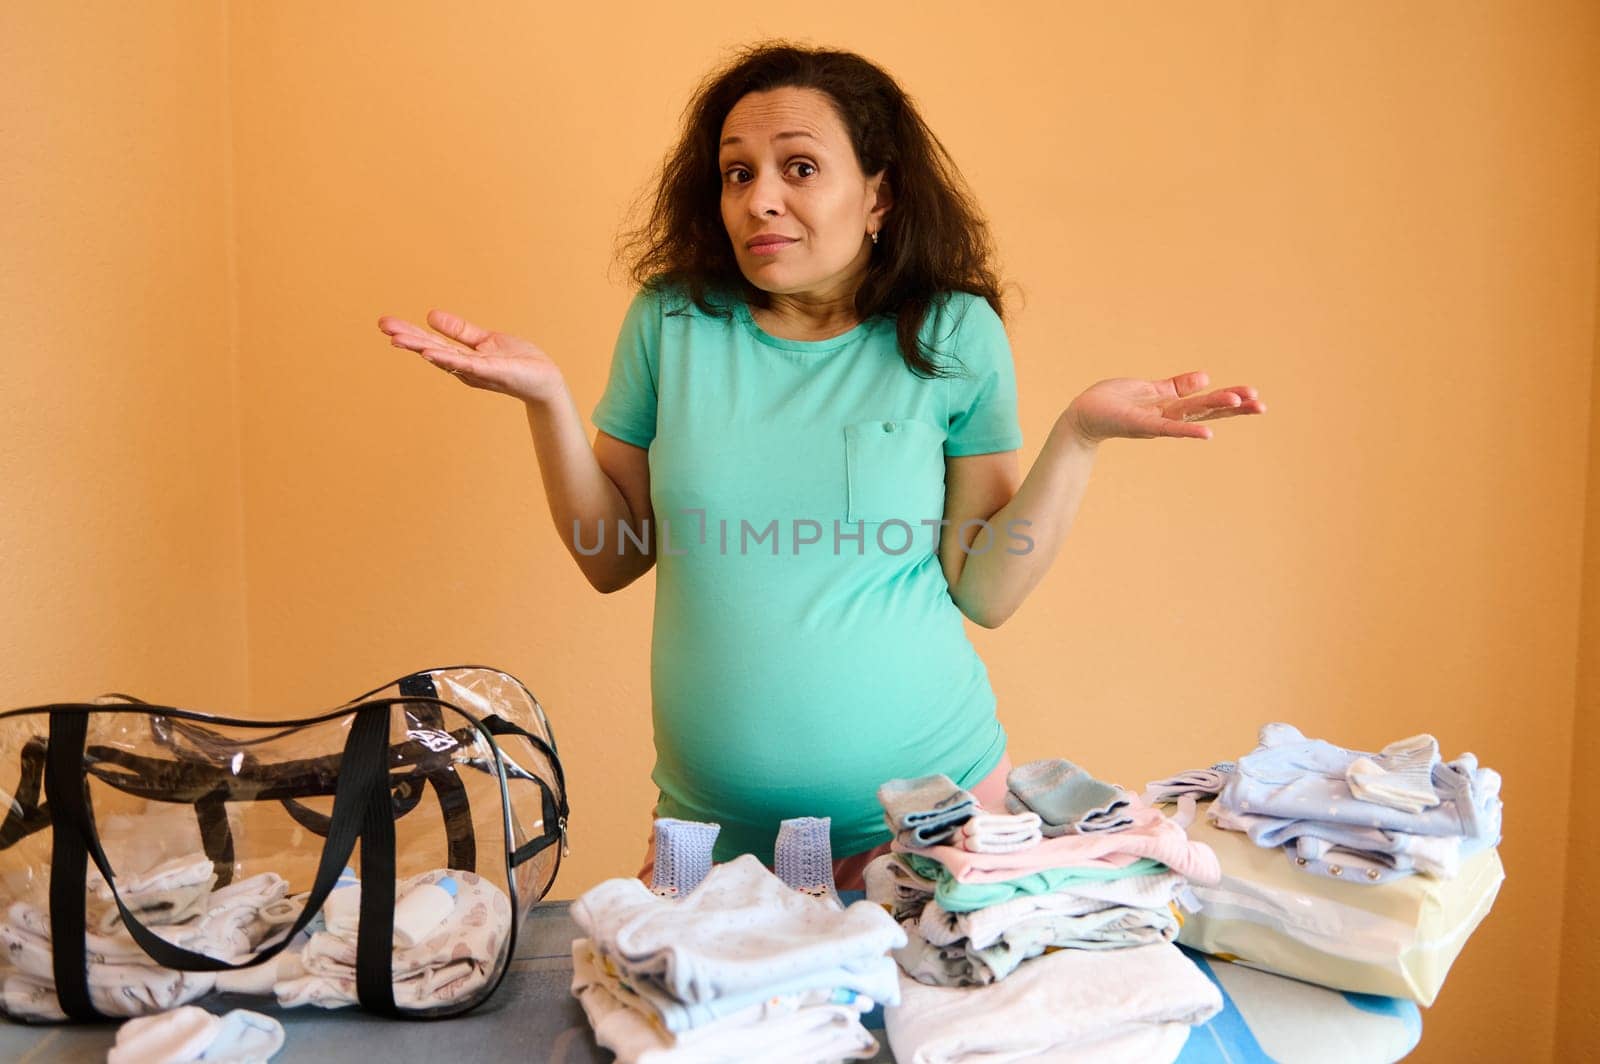 Surprised multi ethnic adult pregnant woman, standing by ironing board with clean ironed baby laundry, holding hands palms up, looking at camera, asking what to pack into a bag for maternity hospital